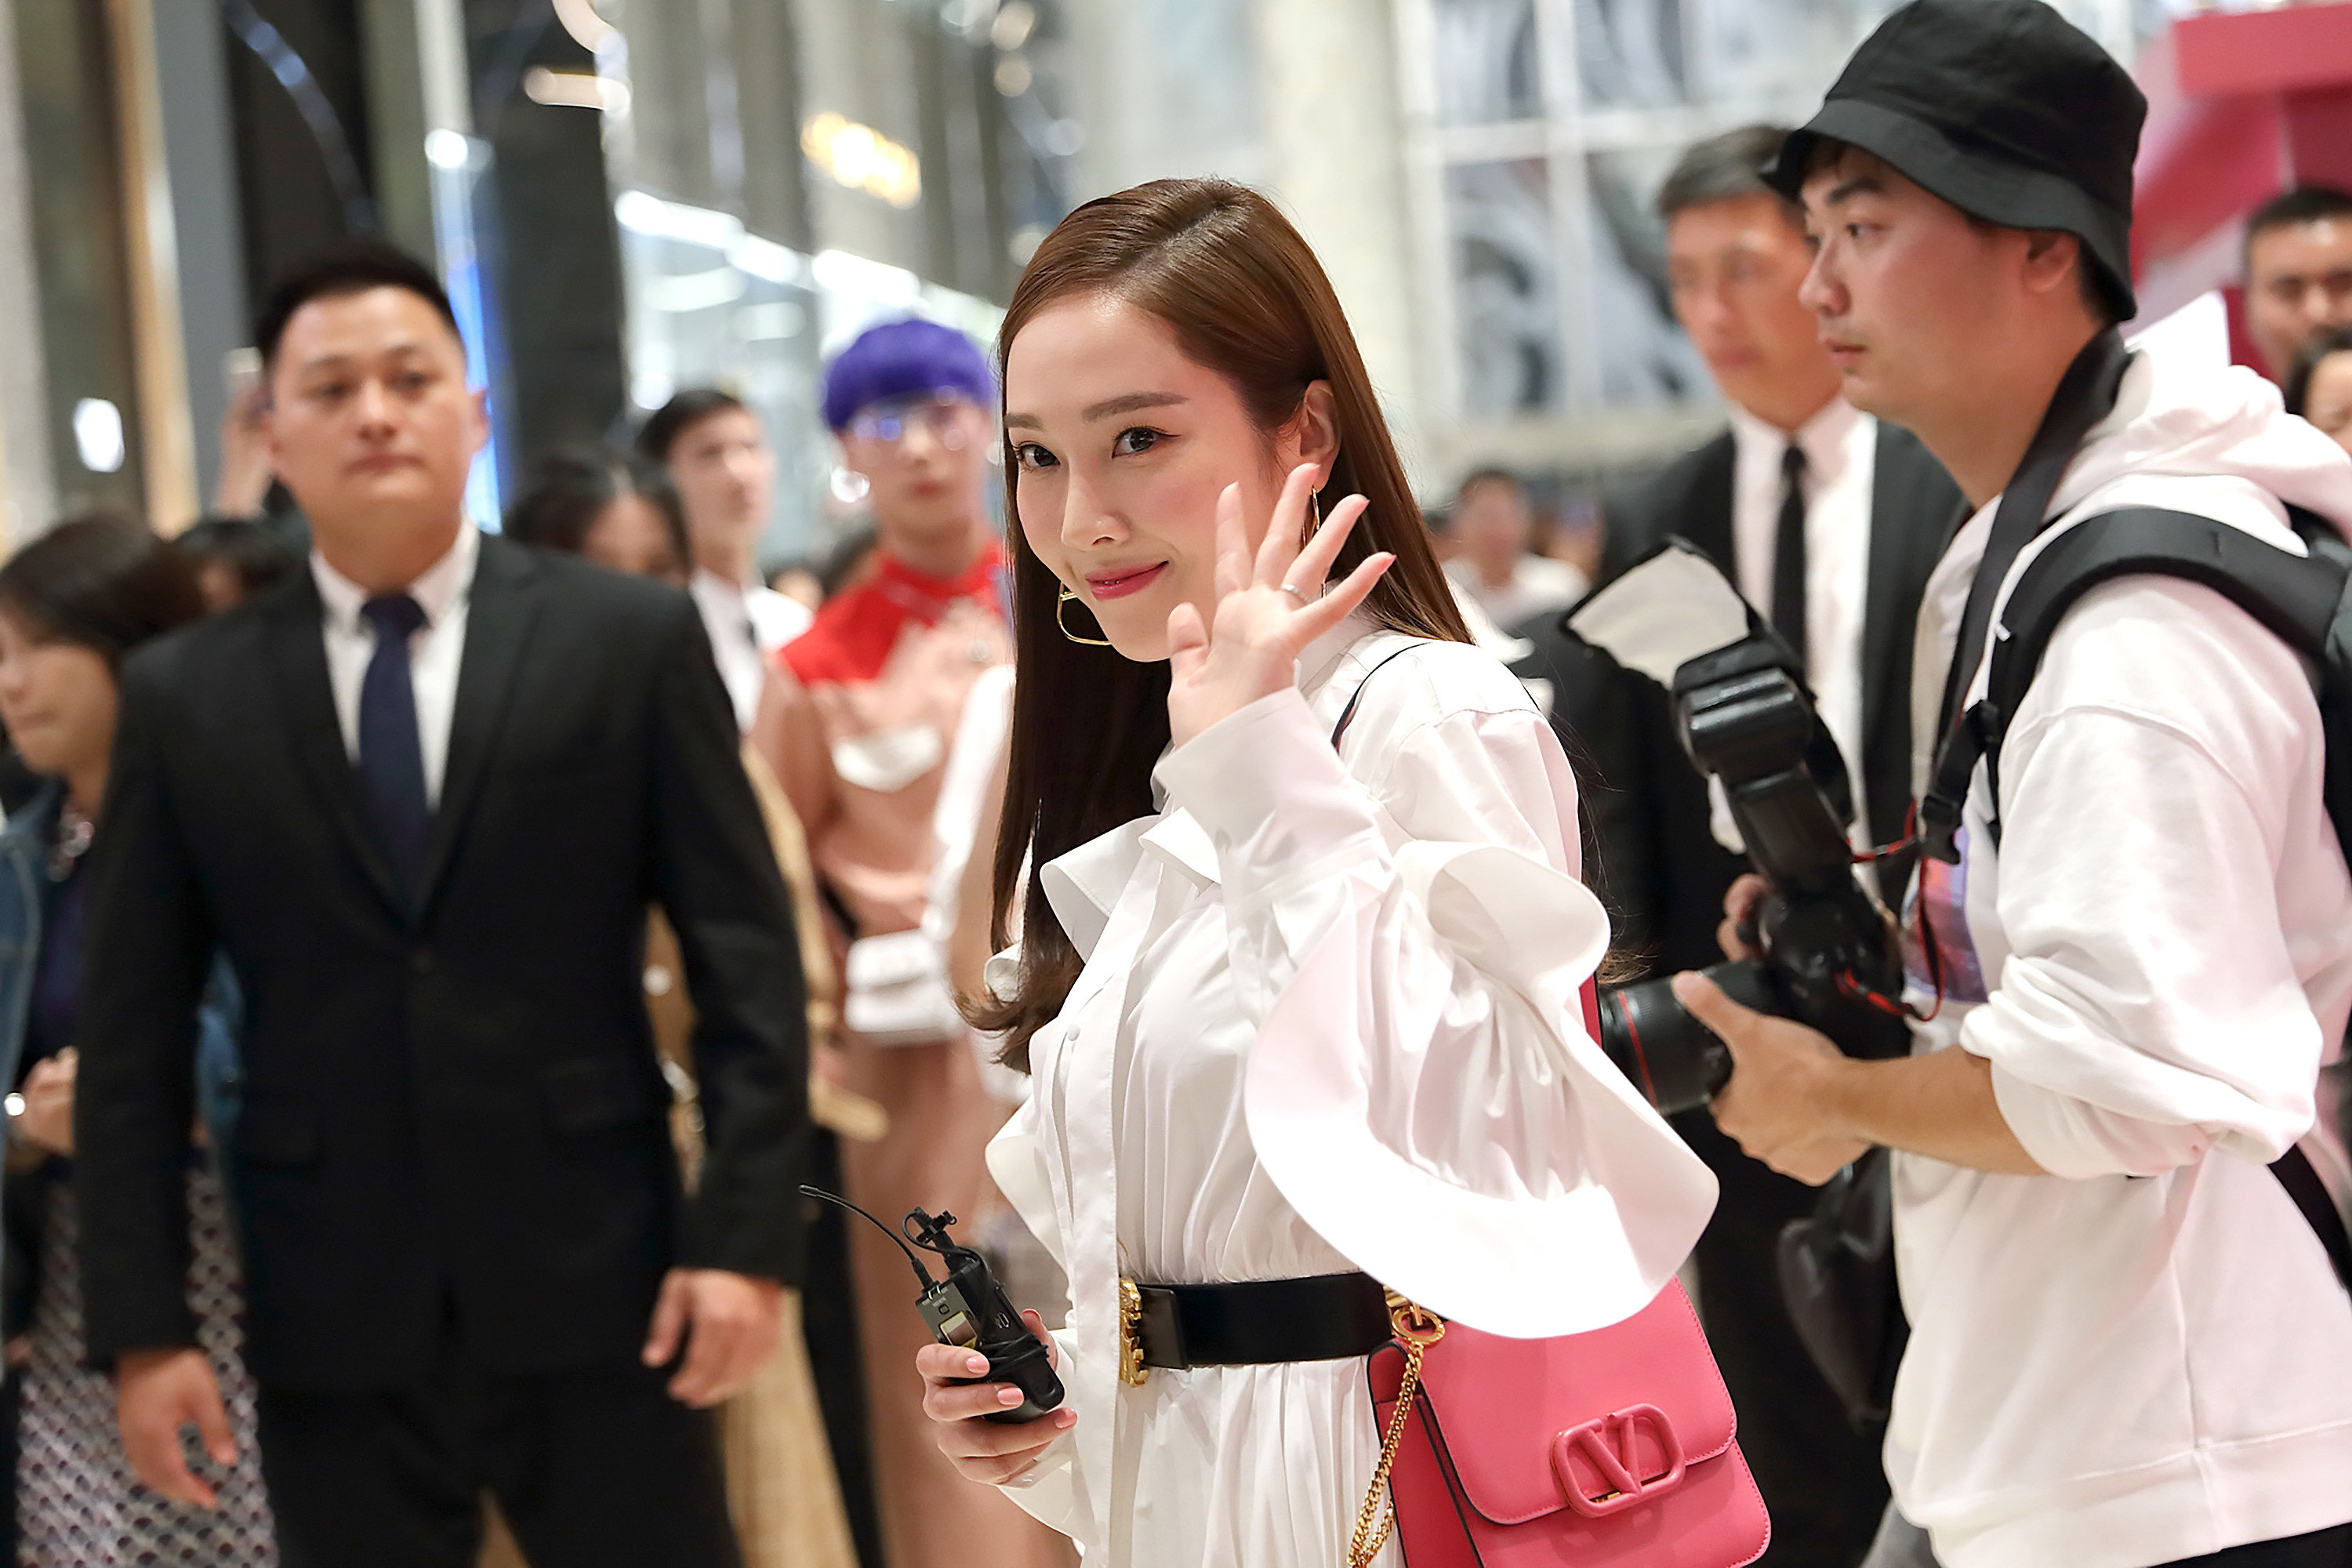 K-pop fans in China have had to come up with new ways to follow their favourite stars, including Jessica Jung, pictured, amid strained tensions between Seoul and Beijing. Photo: VCG/VCG via Getty Images